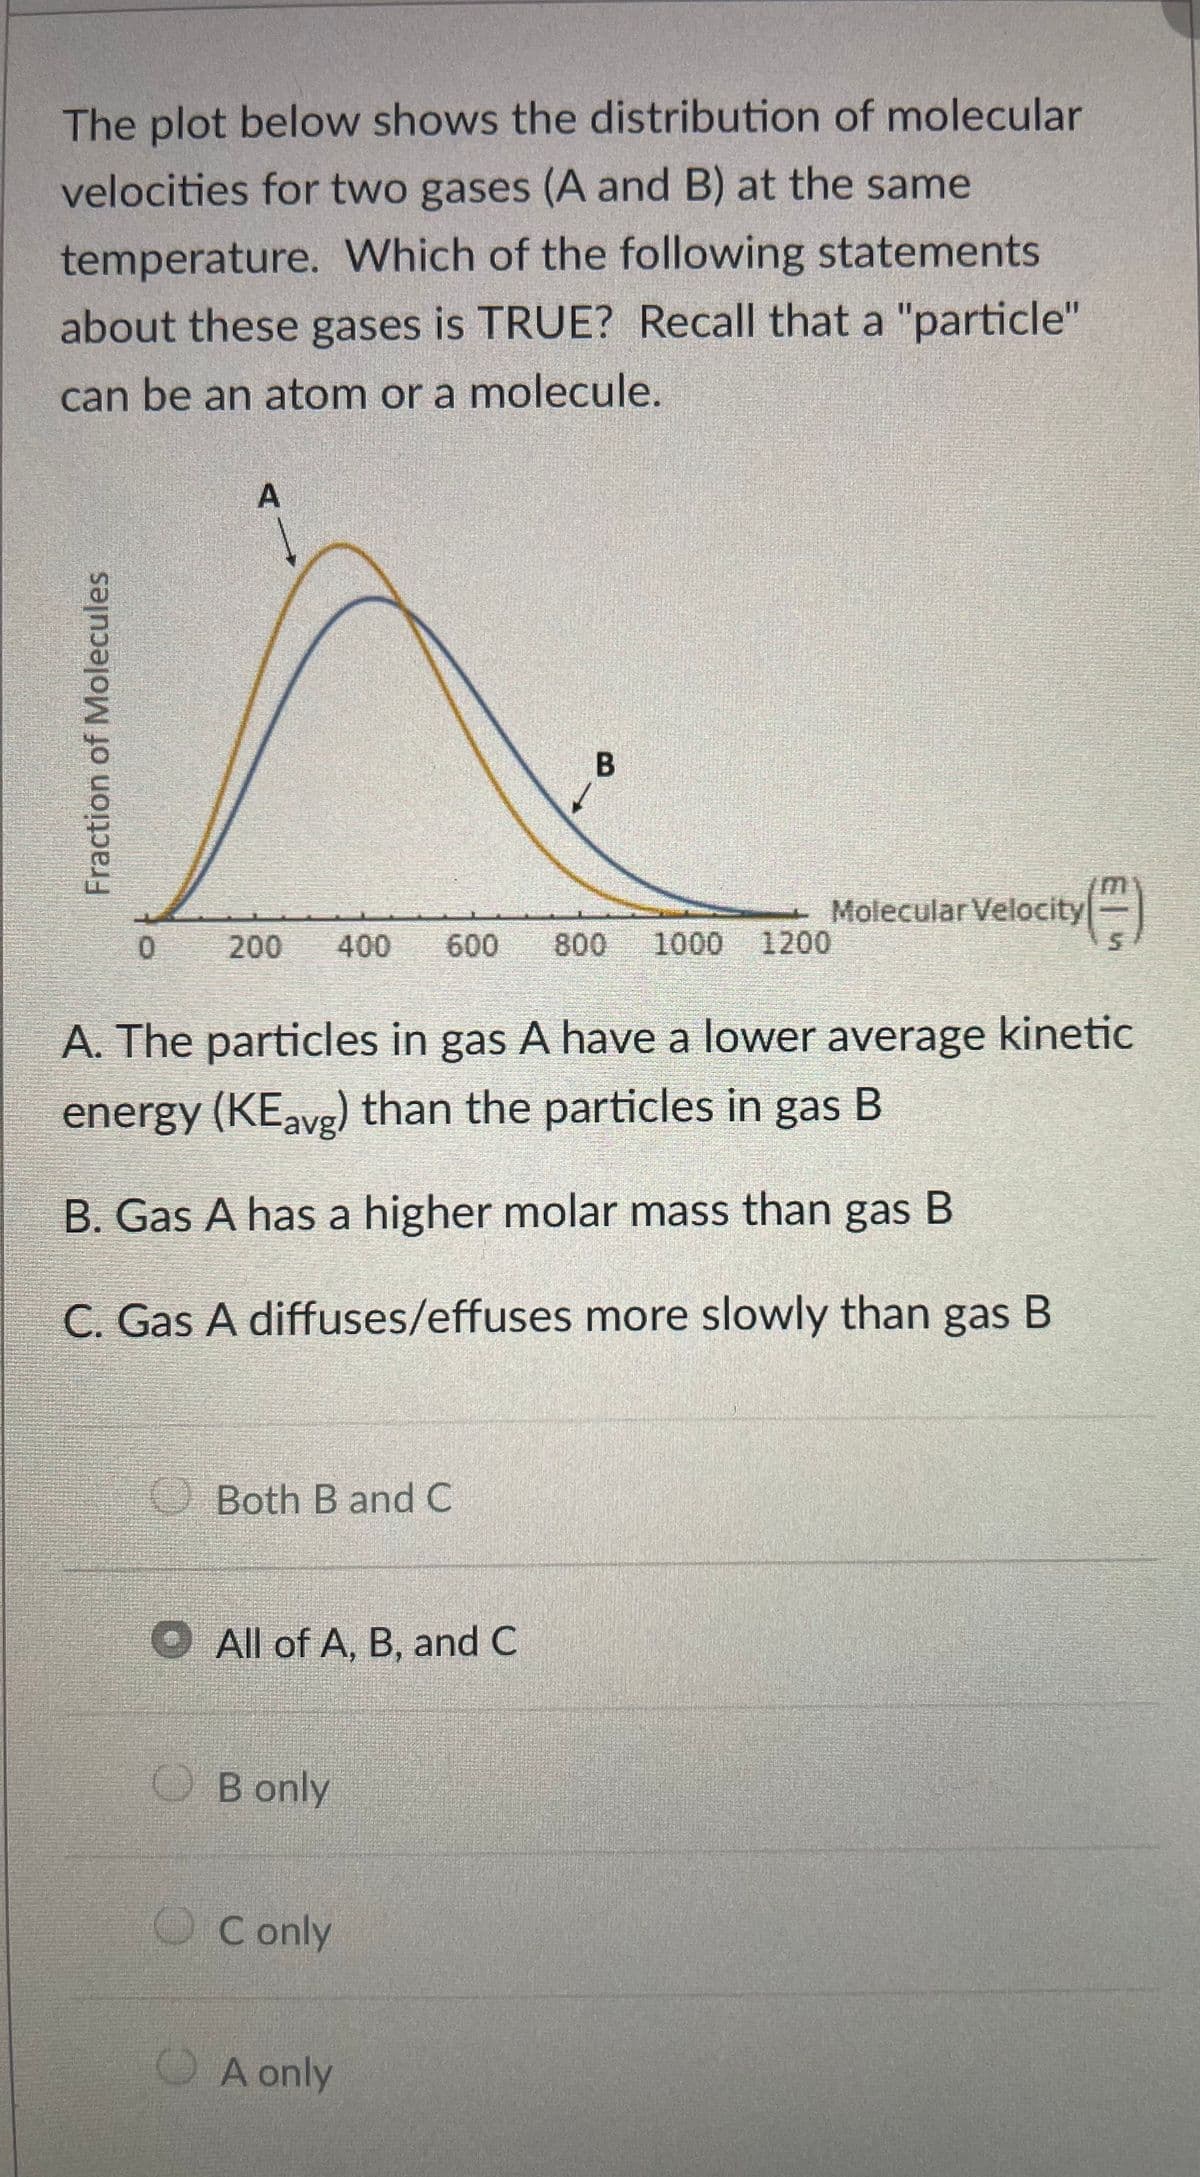 The plot below shows the distribution of molecular
velocities for two gases (A and B) at the same
temperature. Which of the following statements
about these gases is TRUE? Recall that a "particle"
can be an atom or a molecule.
()
Molecular Velocity
200
400
600
800
1000 1200
A. The particles in gas A have a lower average kinetic
energy (KEavg) than the particles in gas B
B. Gas A has a higher molar mass than gas B
C. Gas A diffuses/effuses more slowly than gas B
OBoth B and C
O All of A, B, and C
O B only
OC only
OA only
Fraction of Molecules
